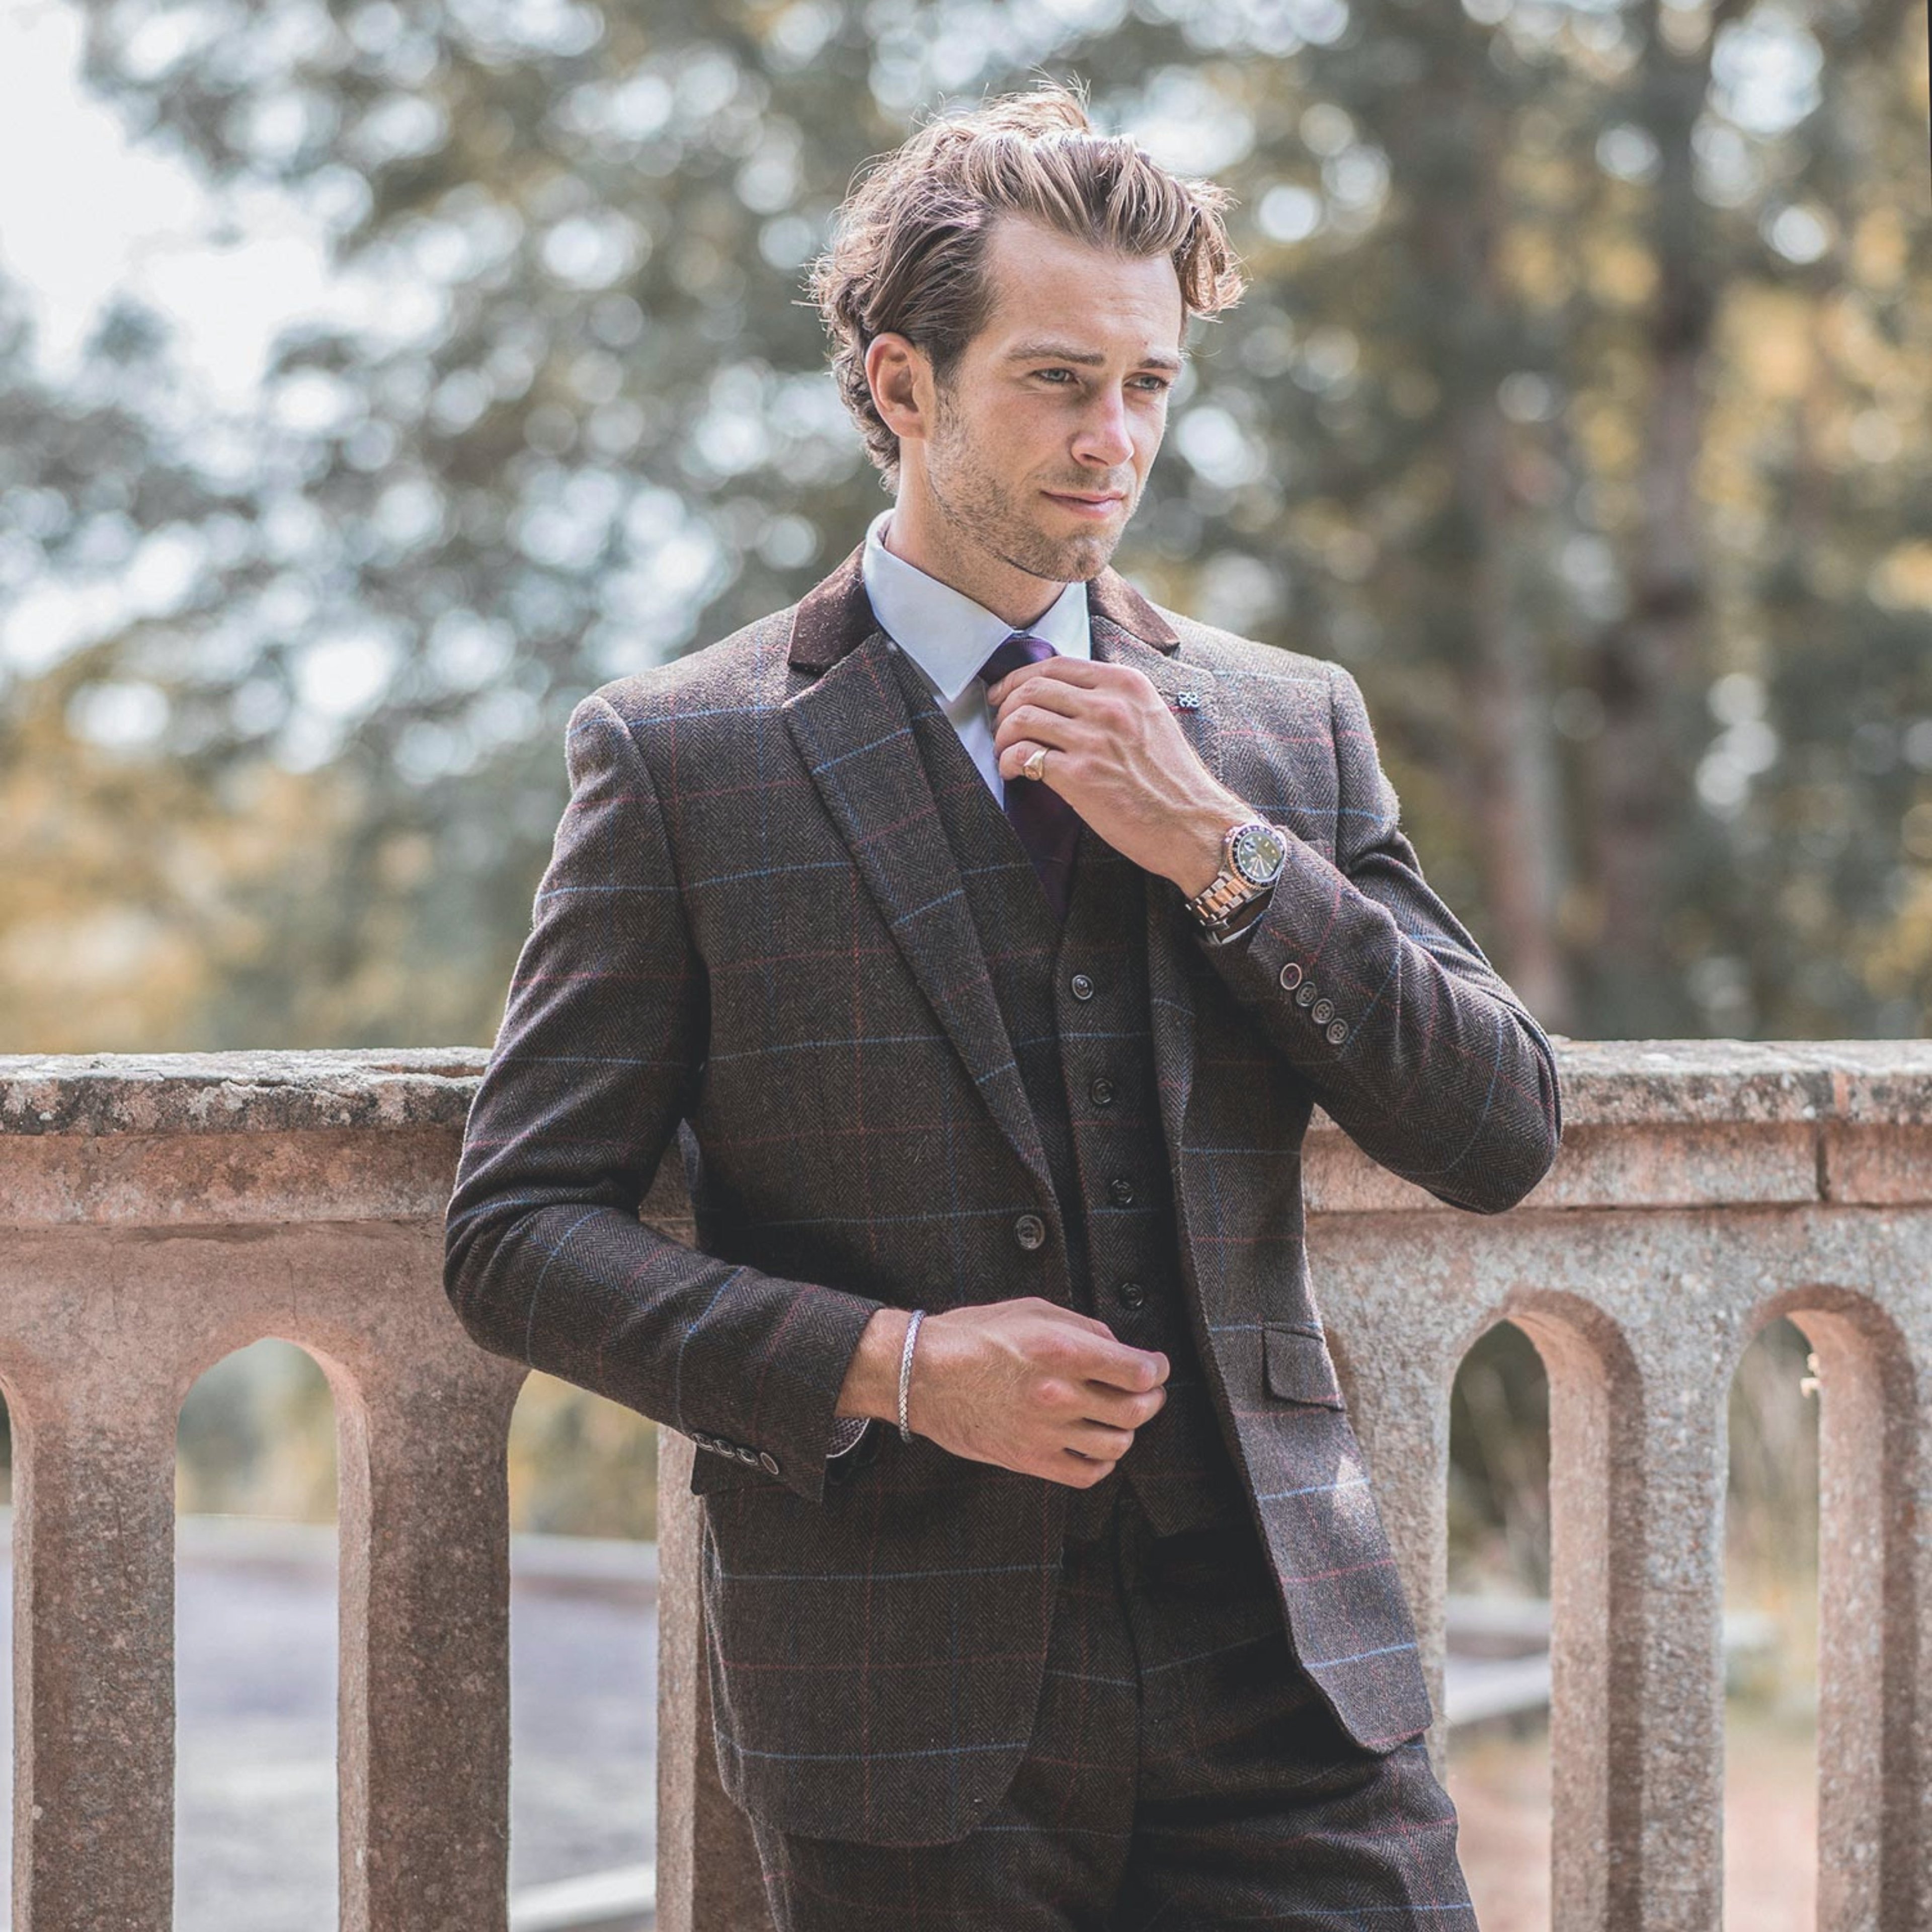 The Three Basic Types of Suits: The Two-Piece, the Three-Piece, and the Tuxedo